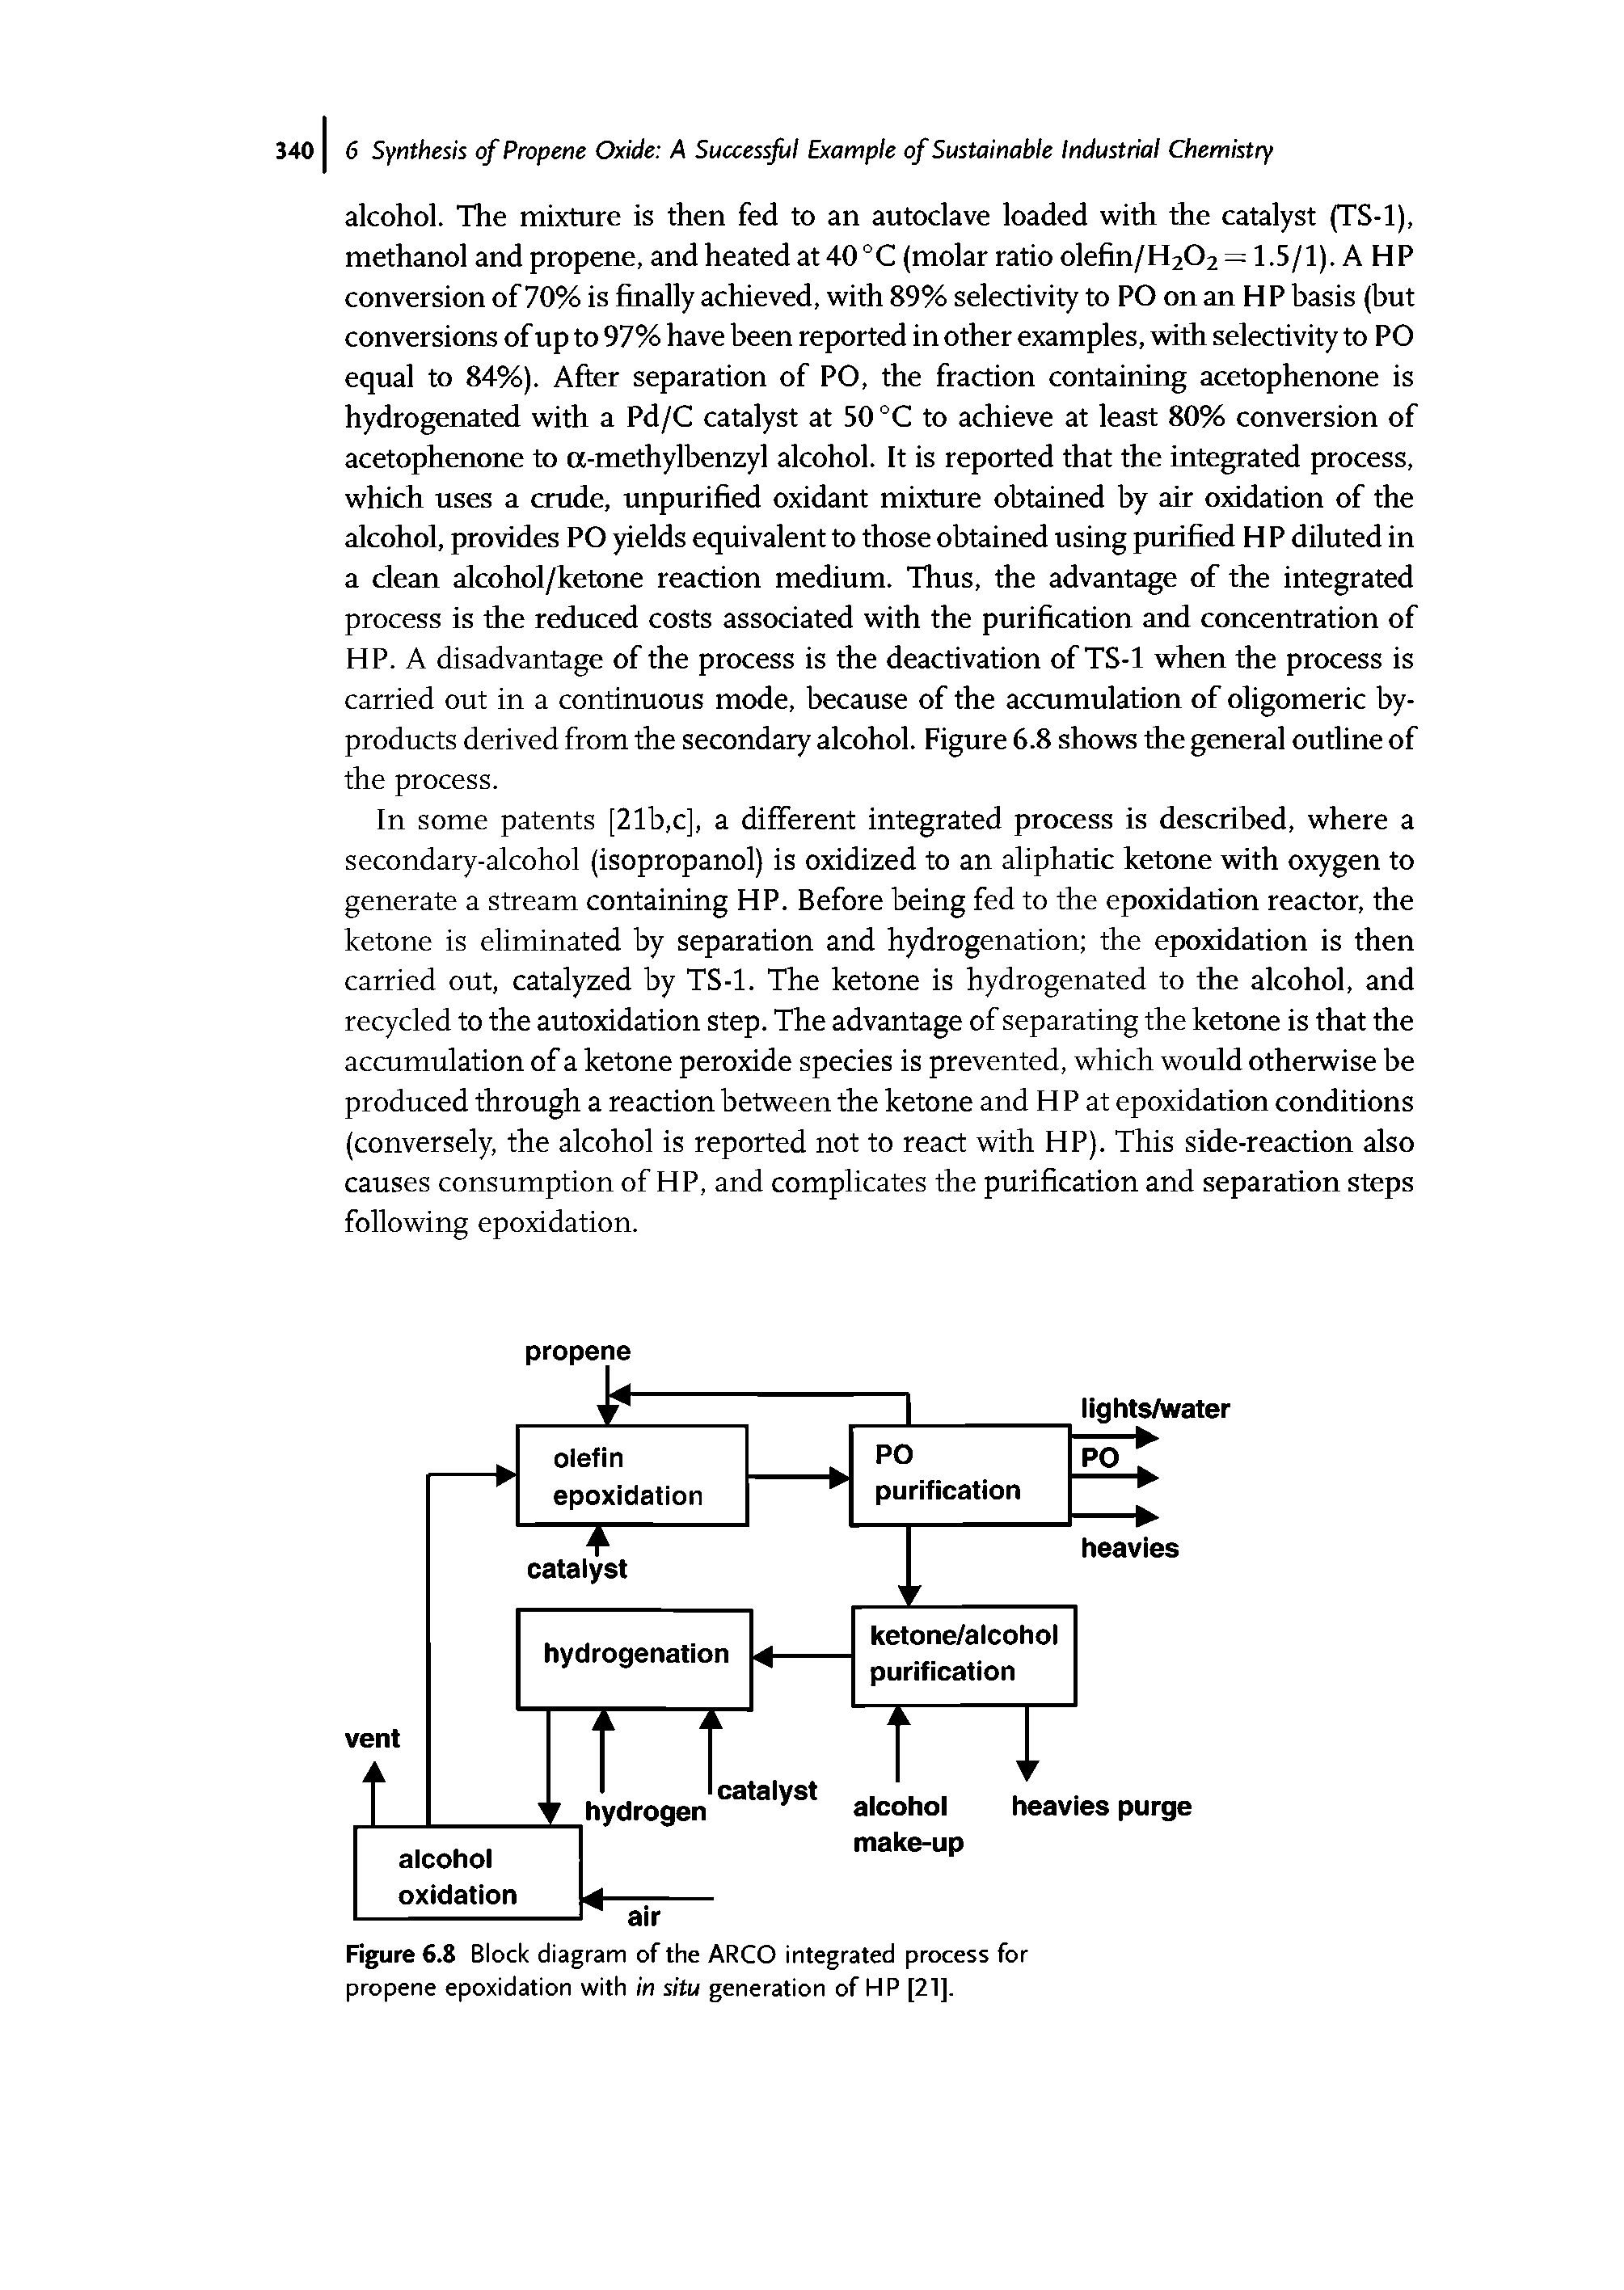 Figure 6.8 Block diagram of the ARCO integrated process for propene epoxidation with in situ generation of HP [21].